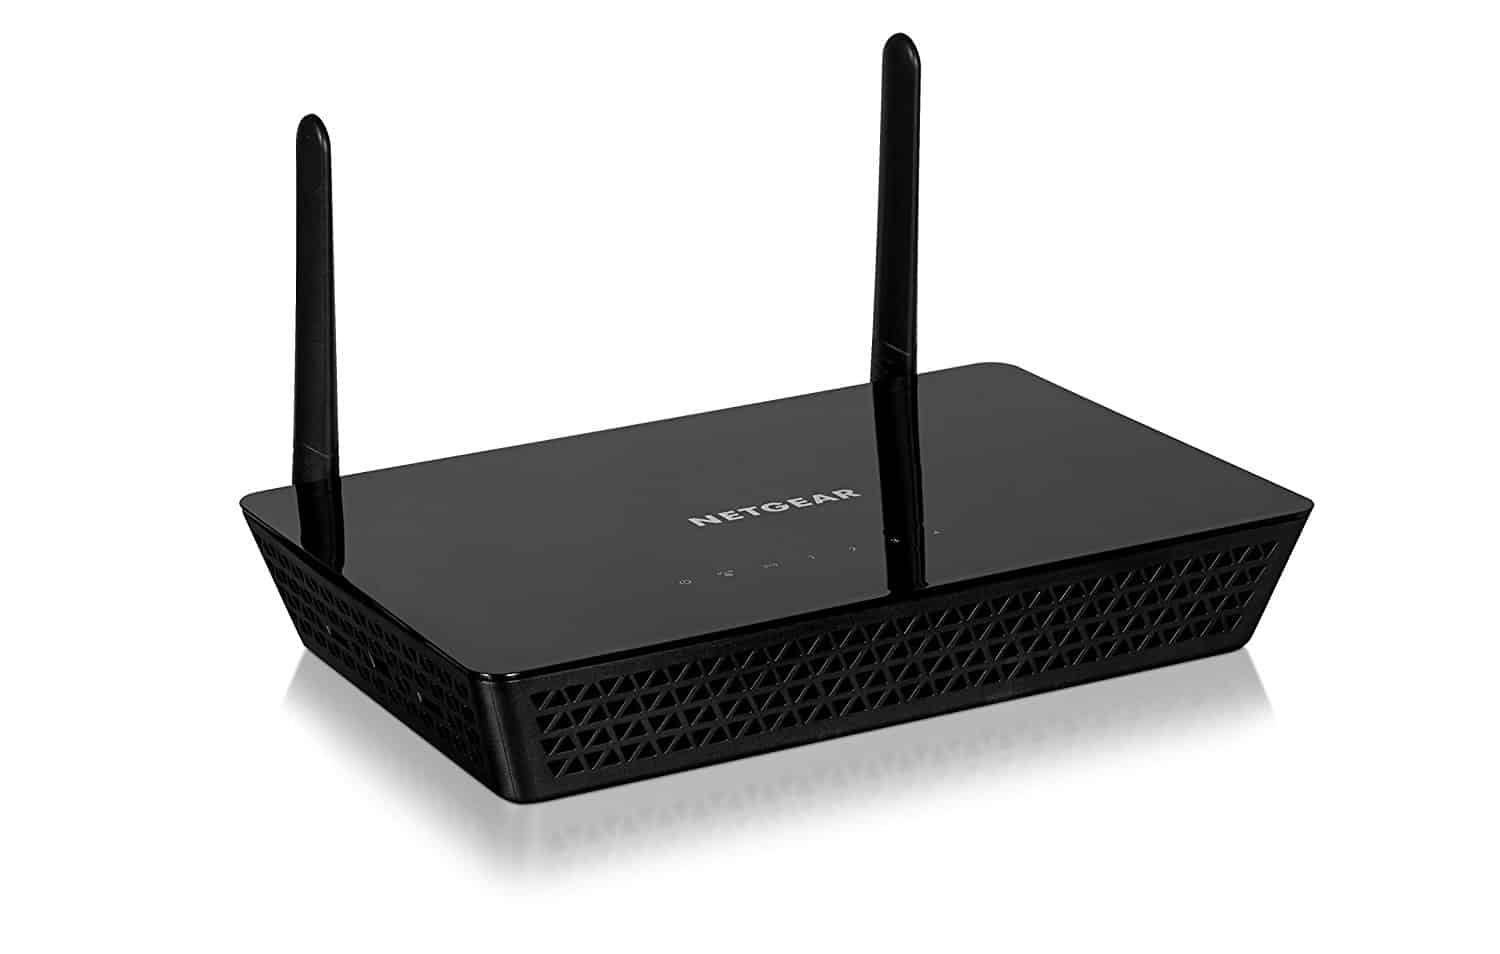 Top 10 Best Wifi Routers For Small Business In 2020